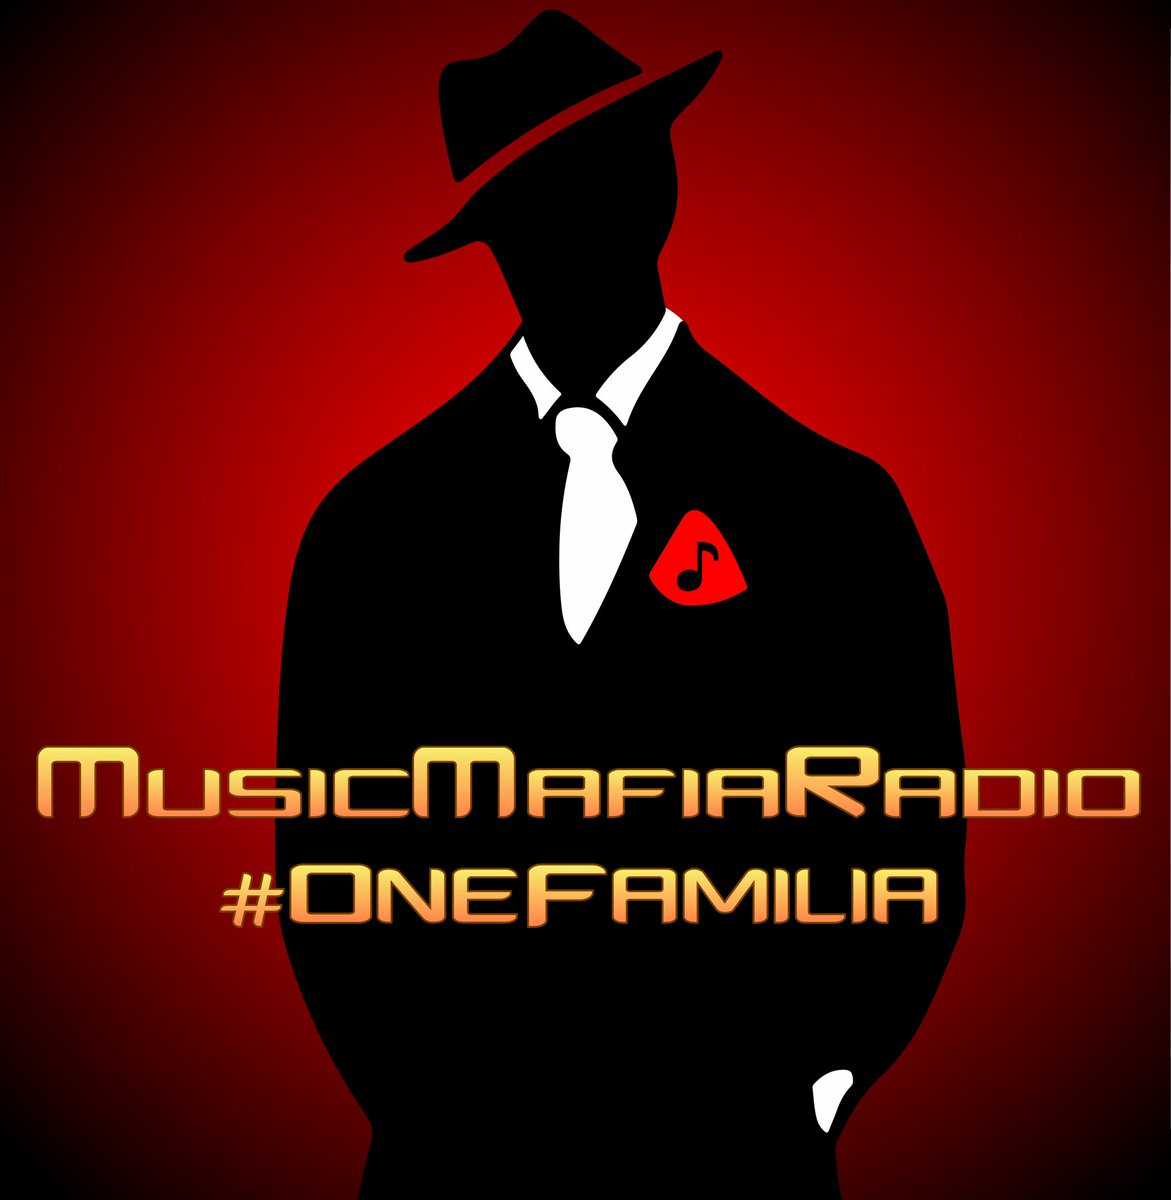 An evening of Cozmic Country is starting on @MusicMafiaRadio. Six hours of the best country and southern rock to be heard anywhere! streaming.live365.com/a20743 #OneFamilia #ItsTheMusicThatMatters